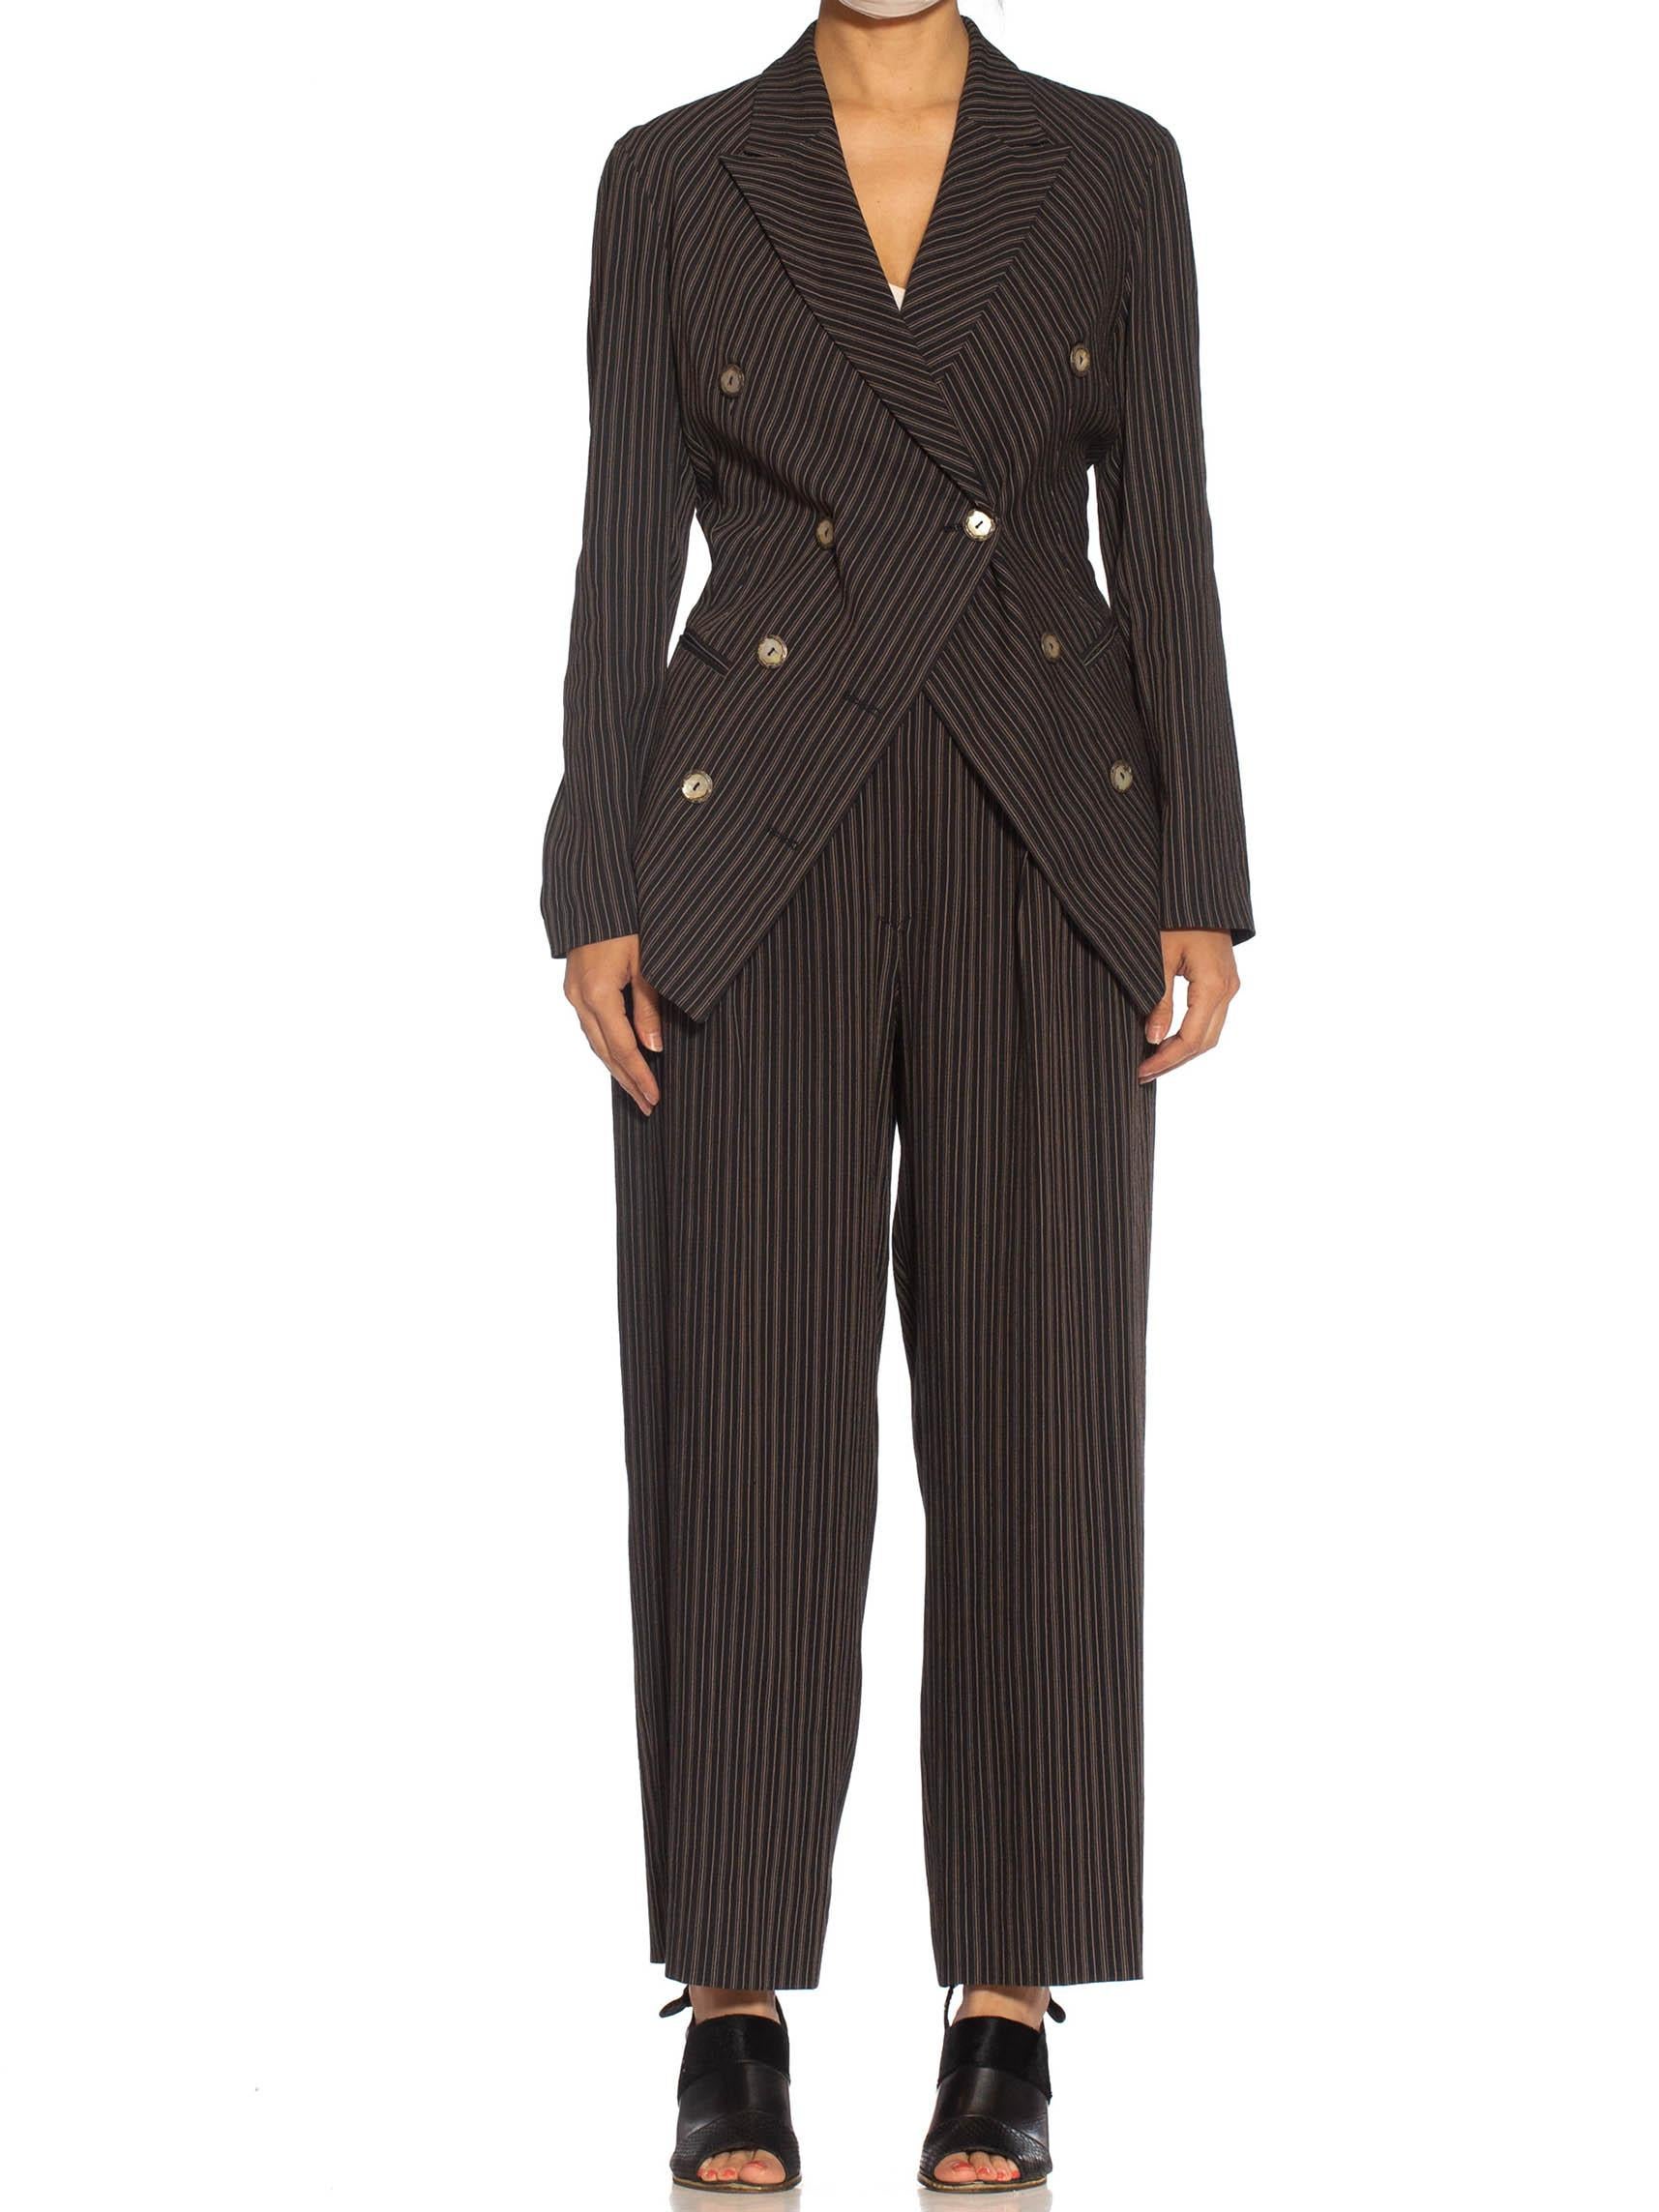 1990S RIFAT OZBEK Black & Beige Linen Blend Pinstripe Pant Suit In Excellent Condition In New York, NY